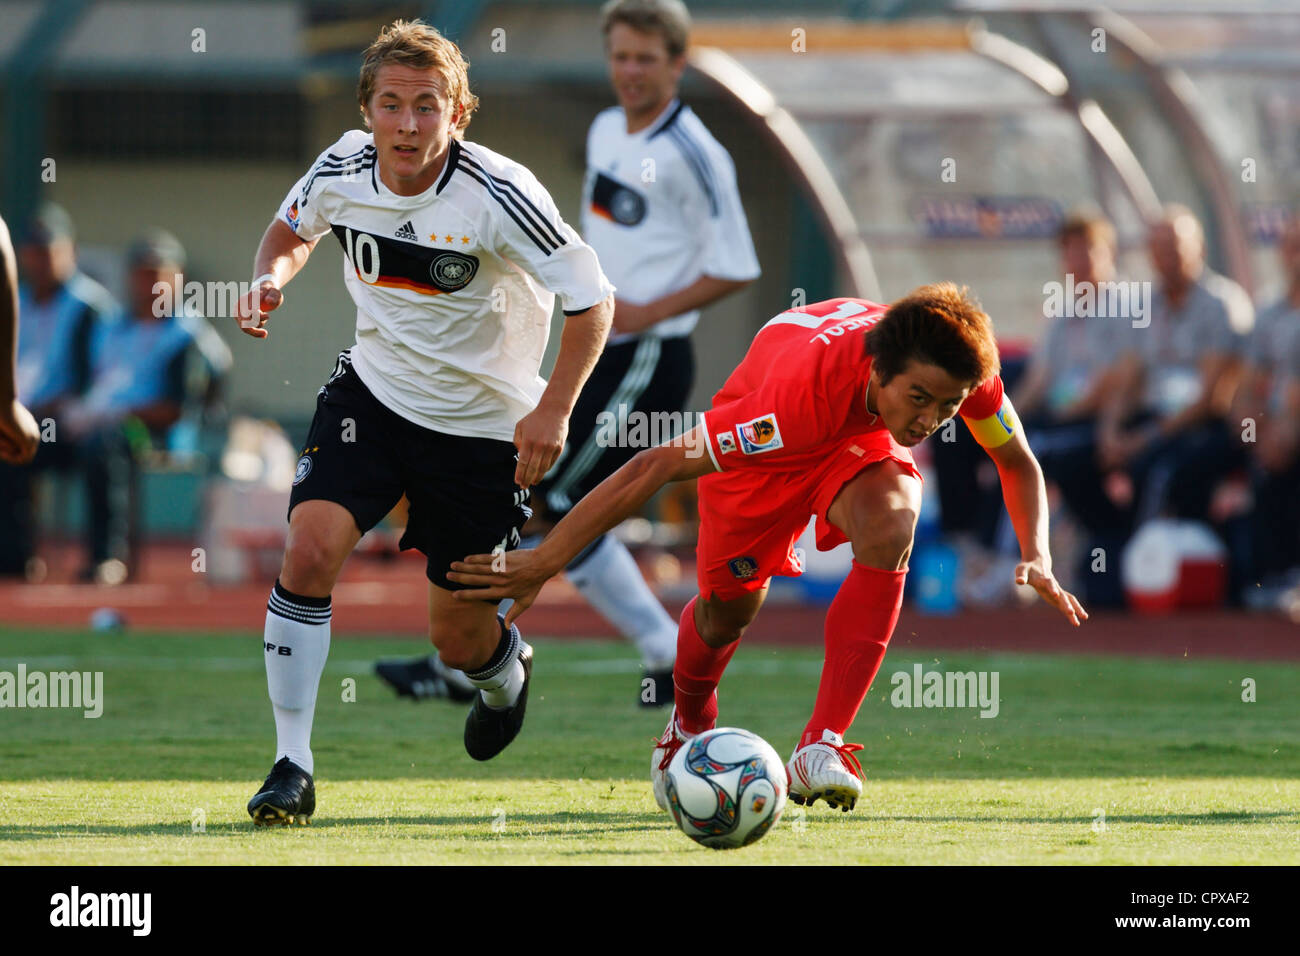 Lewis Holtby of Germany (L) and Ja Cheol Koo of South Korea (R) chase the ball during a FIFA U-20 World Cup Group C match Stock Photo